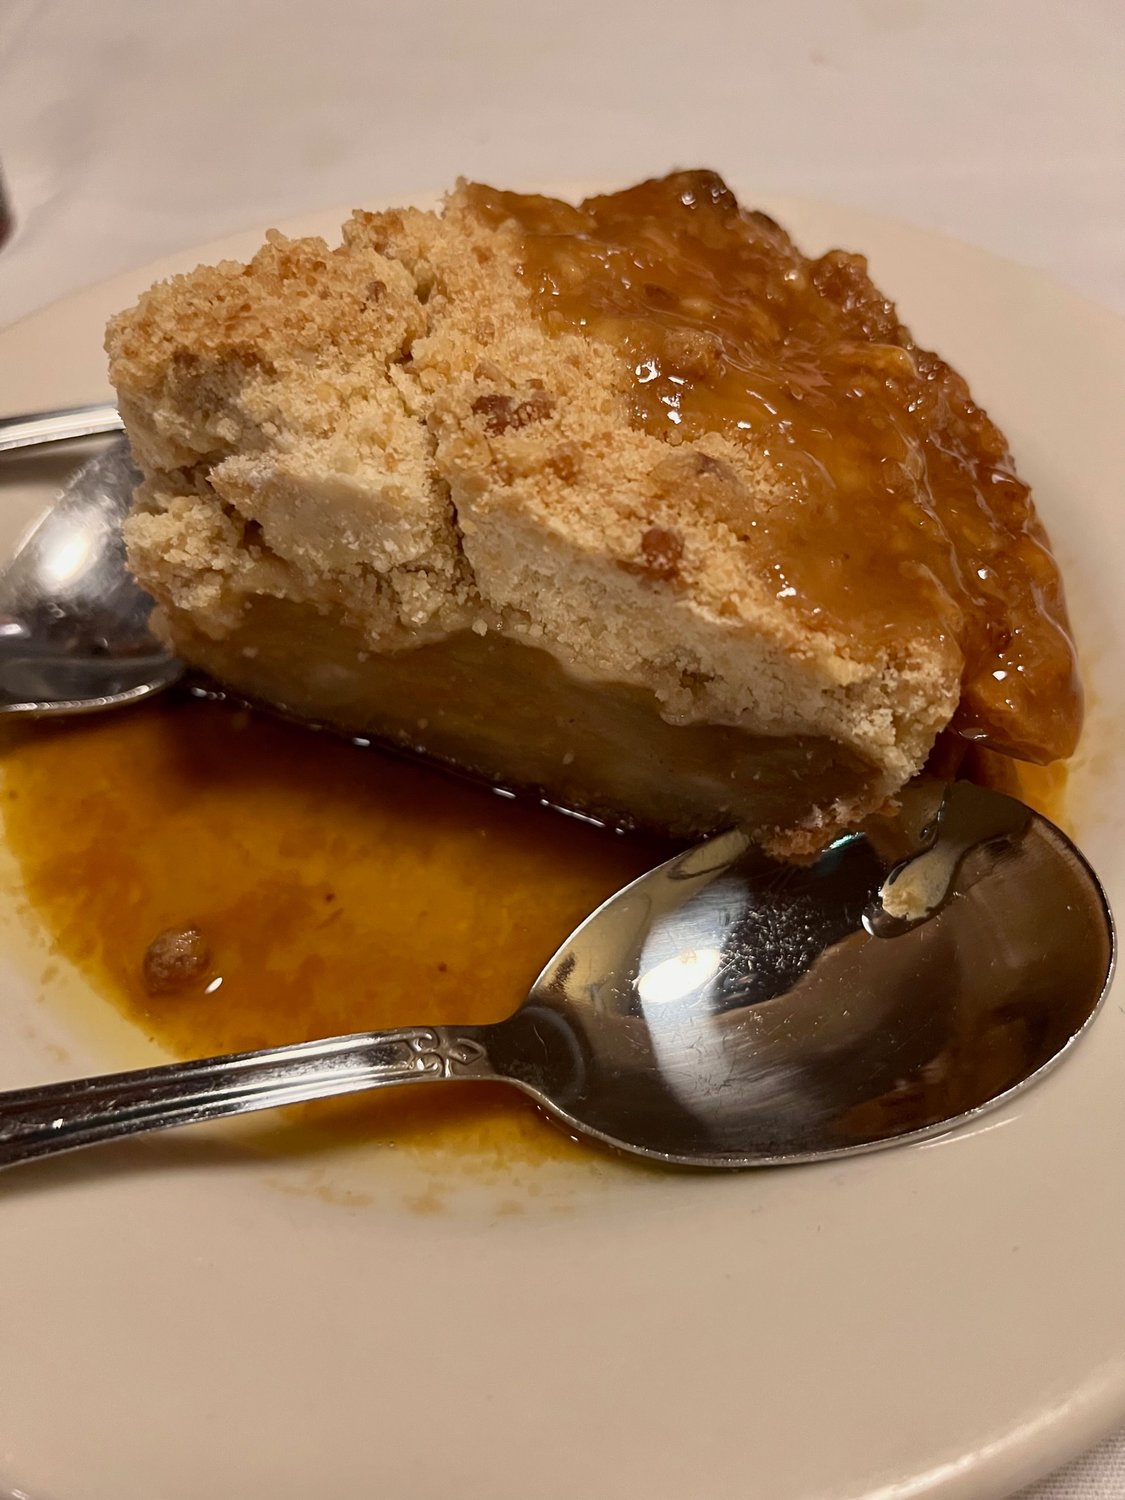 Apple pie topped with rum sauce can be served a la mode at the landmark 42nd Street Oyster Bar & Seafood Grill in downtown Raleigh.